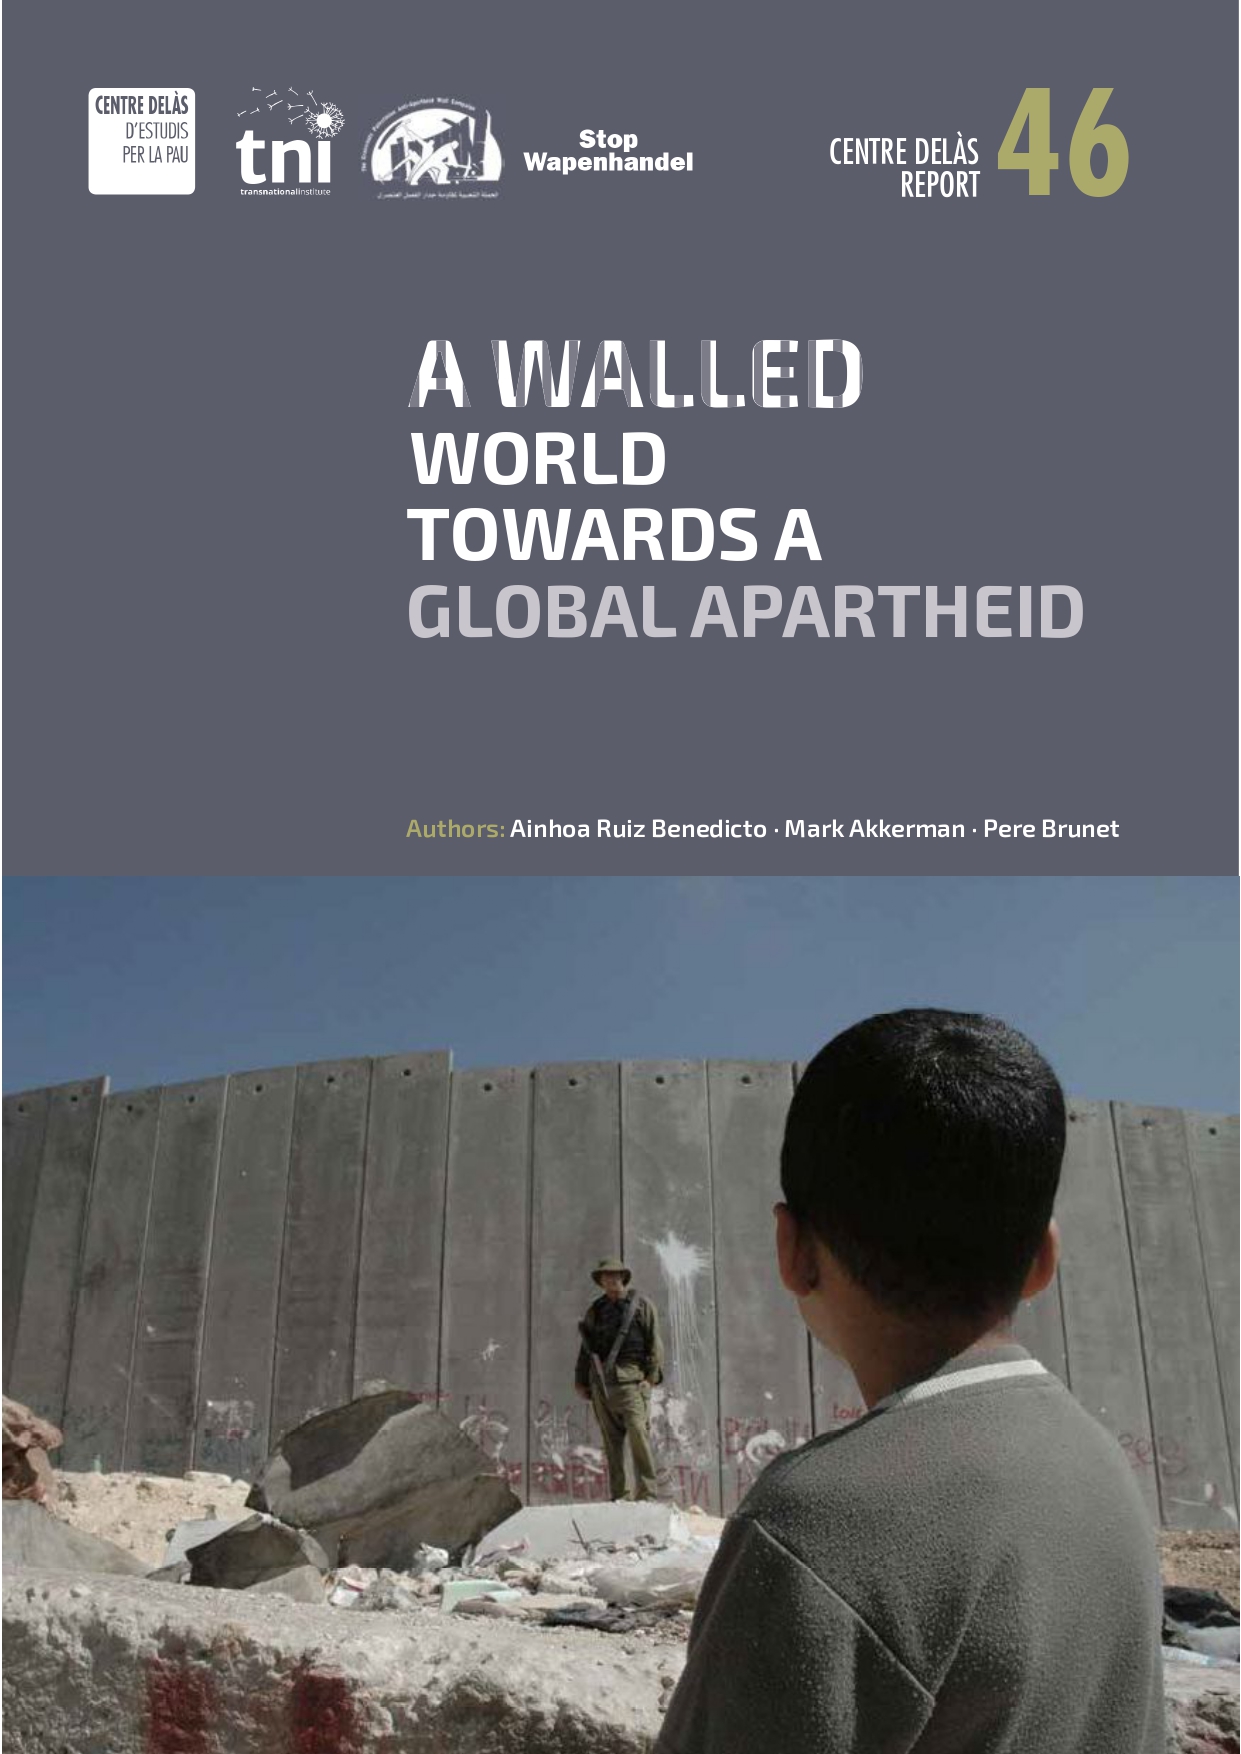 Report 46: “A Walled World, towards a Global Apartheid”